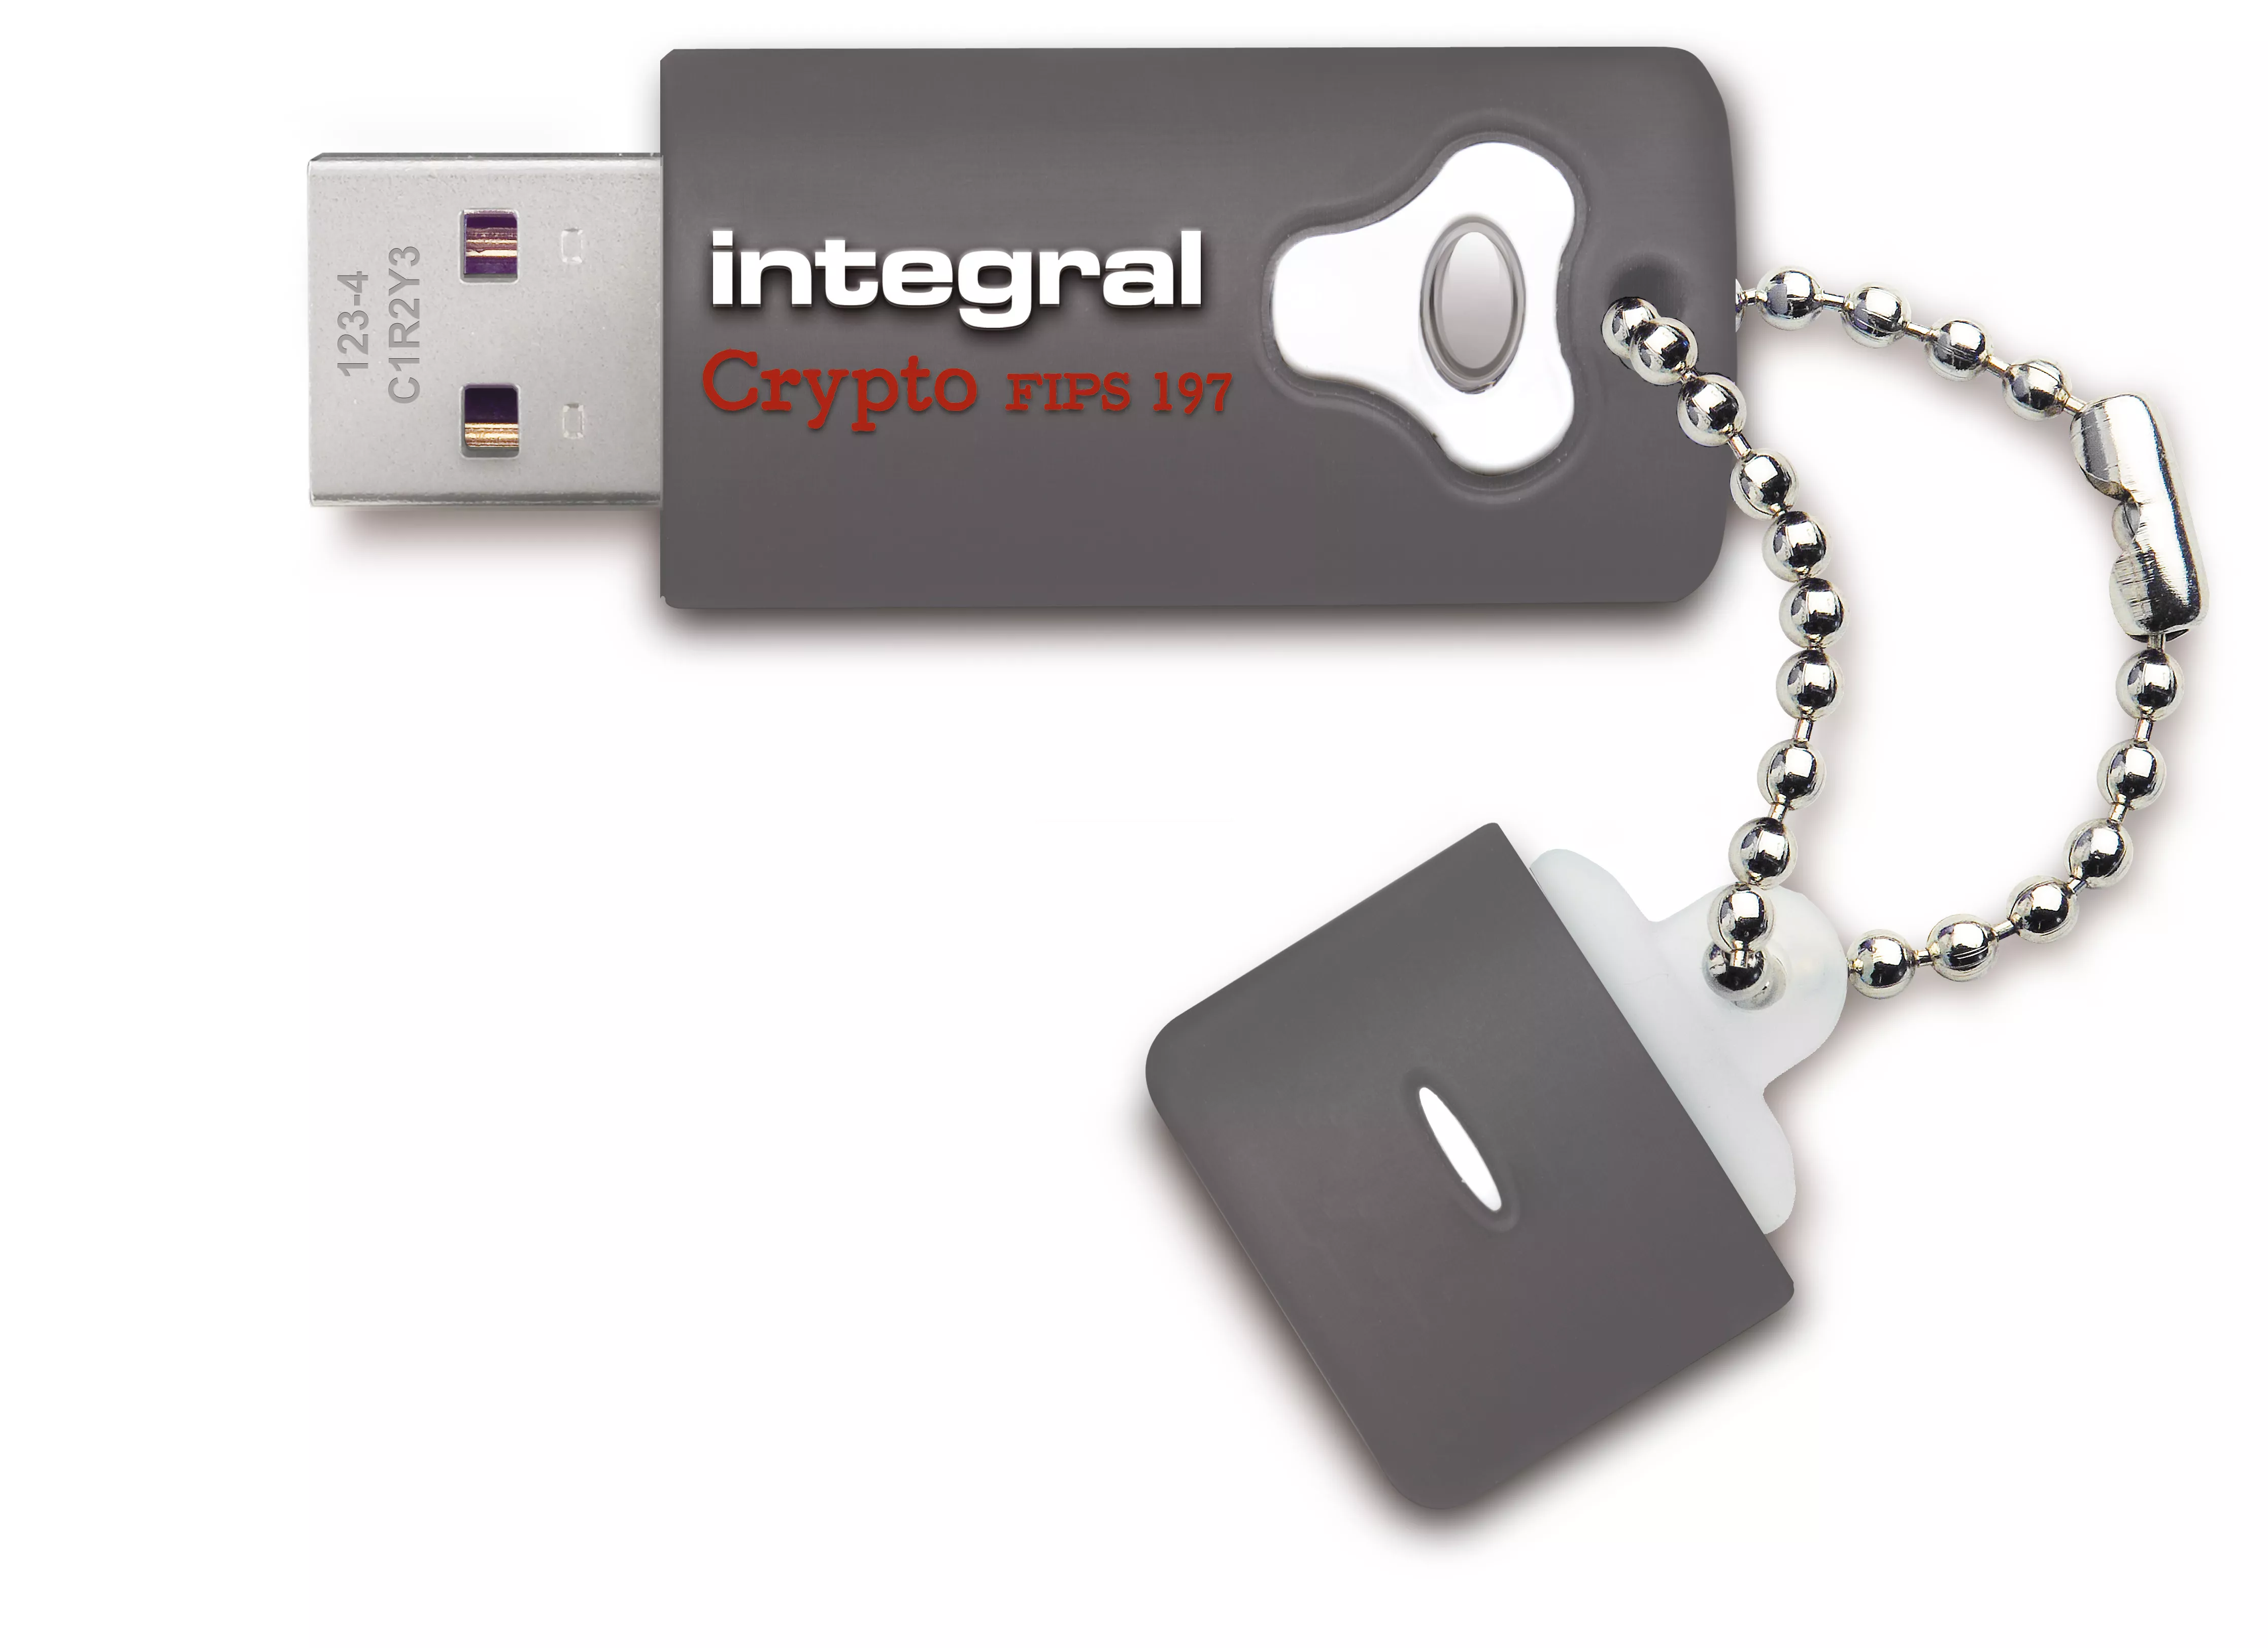 Revendeur officiel Adaptateur stockage Integral 16GB Crypto Drive FIPS 197 Encrypted USB 3.0